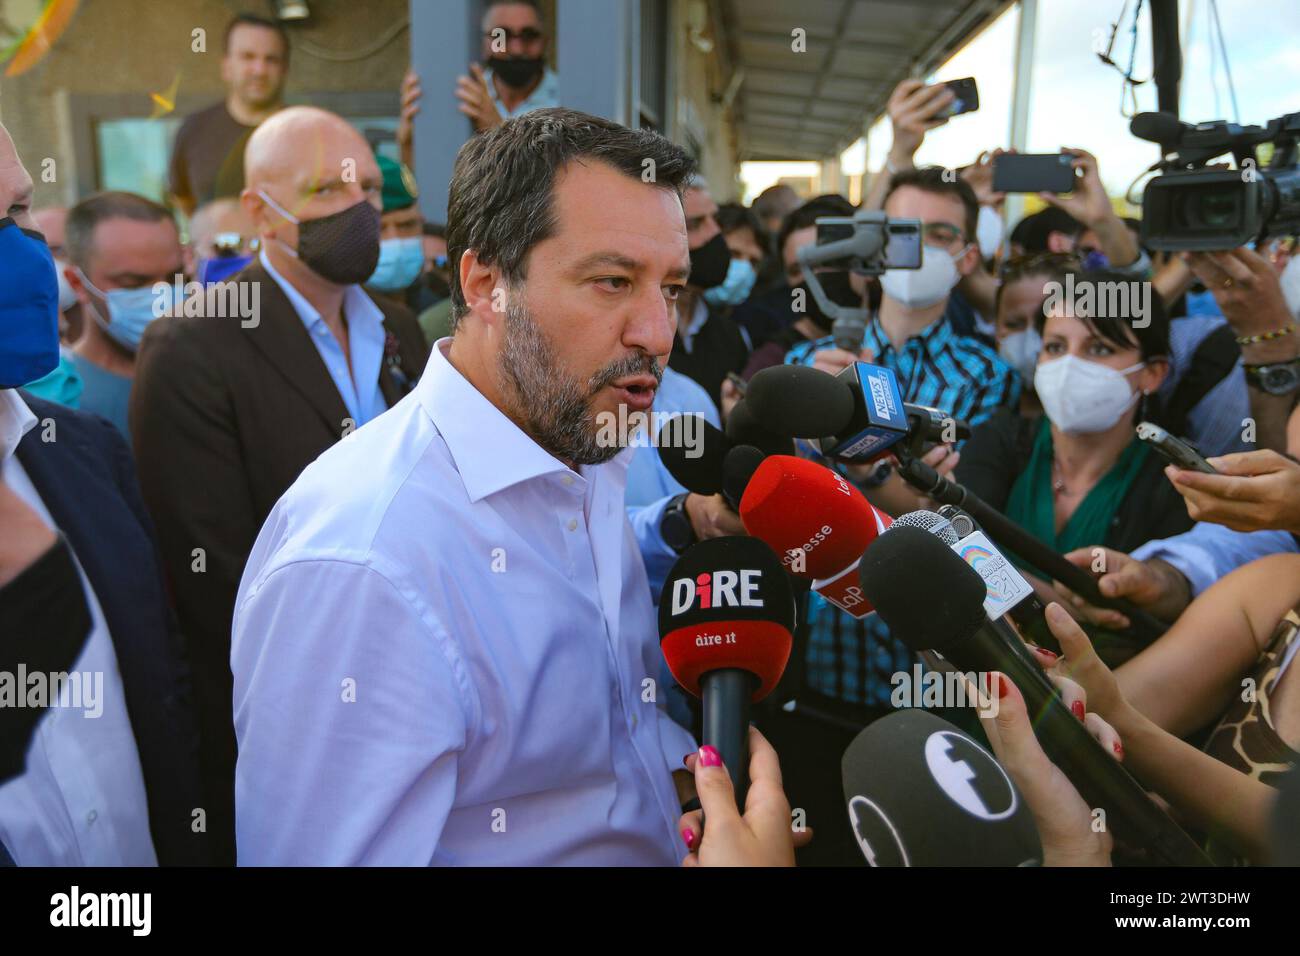 The leader of the Lega party, Matteo Salvini, after visiting the prison of Santa Maria Capua Vetere, in solidarity with the prison guards, accused of Stock Photo